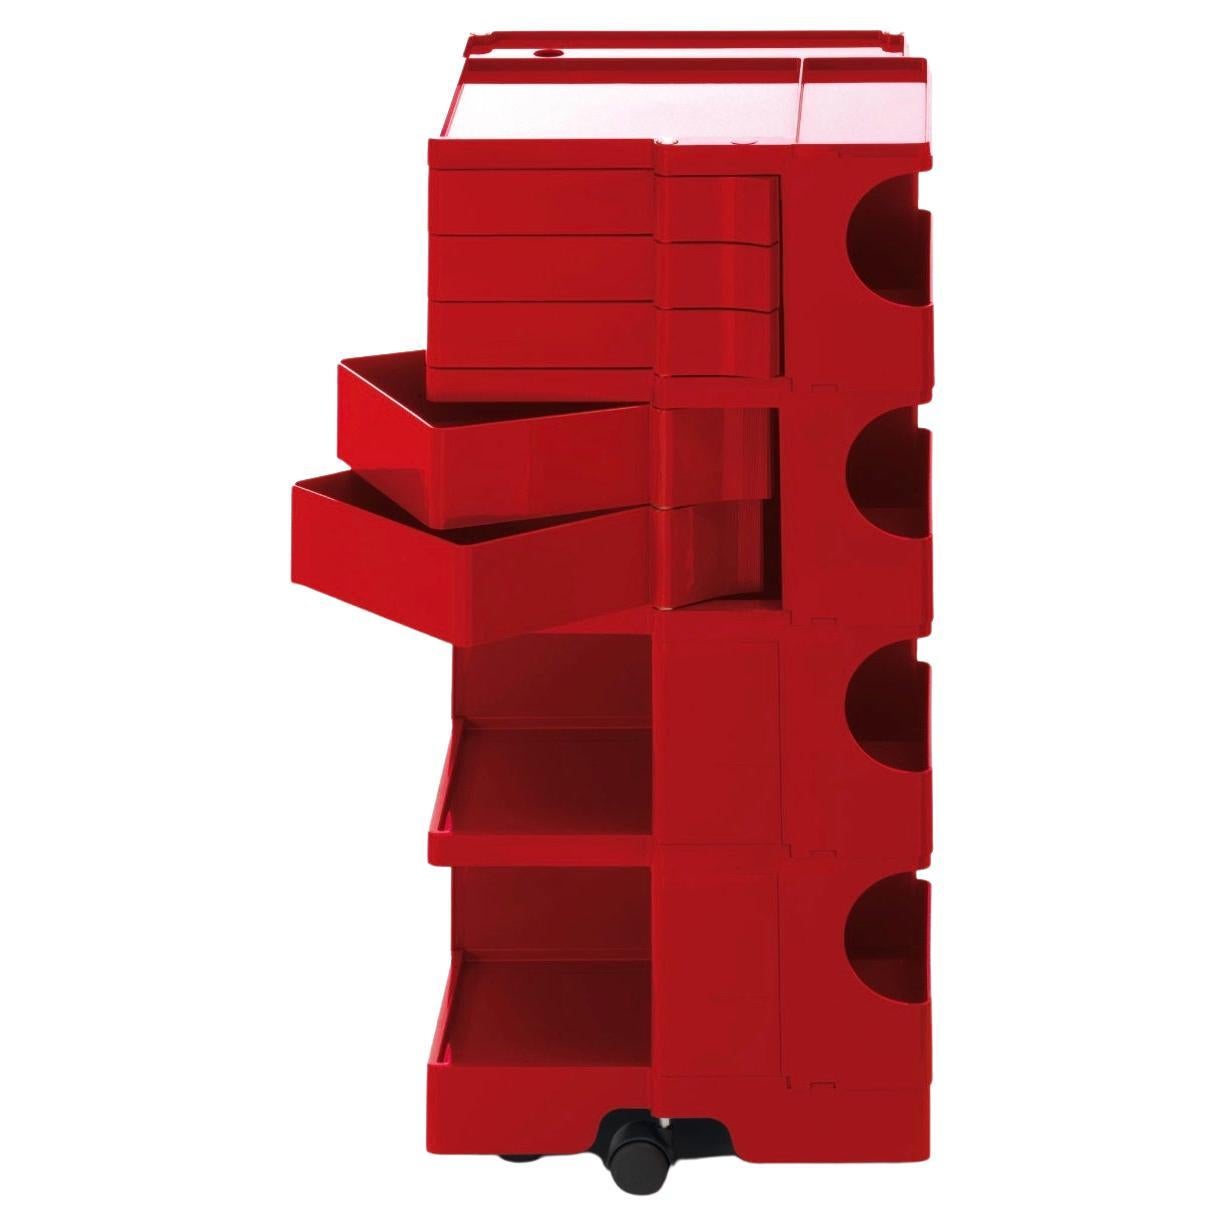 Joe Colombo 'Boby' Trolley 1970 Size L with 5 Drawers in Red for B-Line For Sale